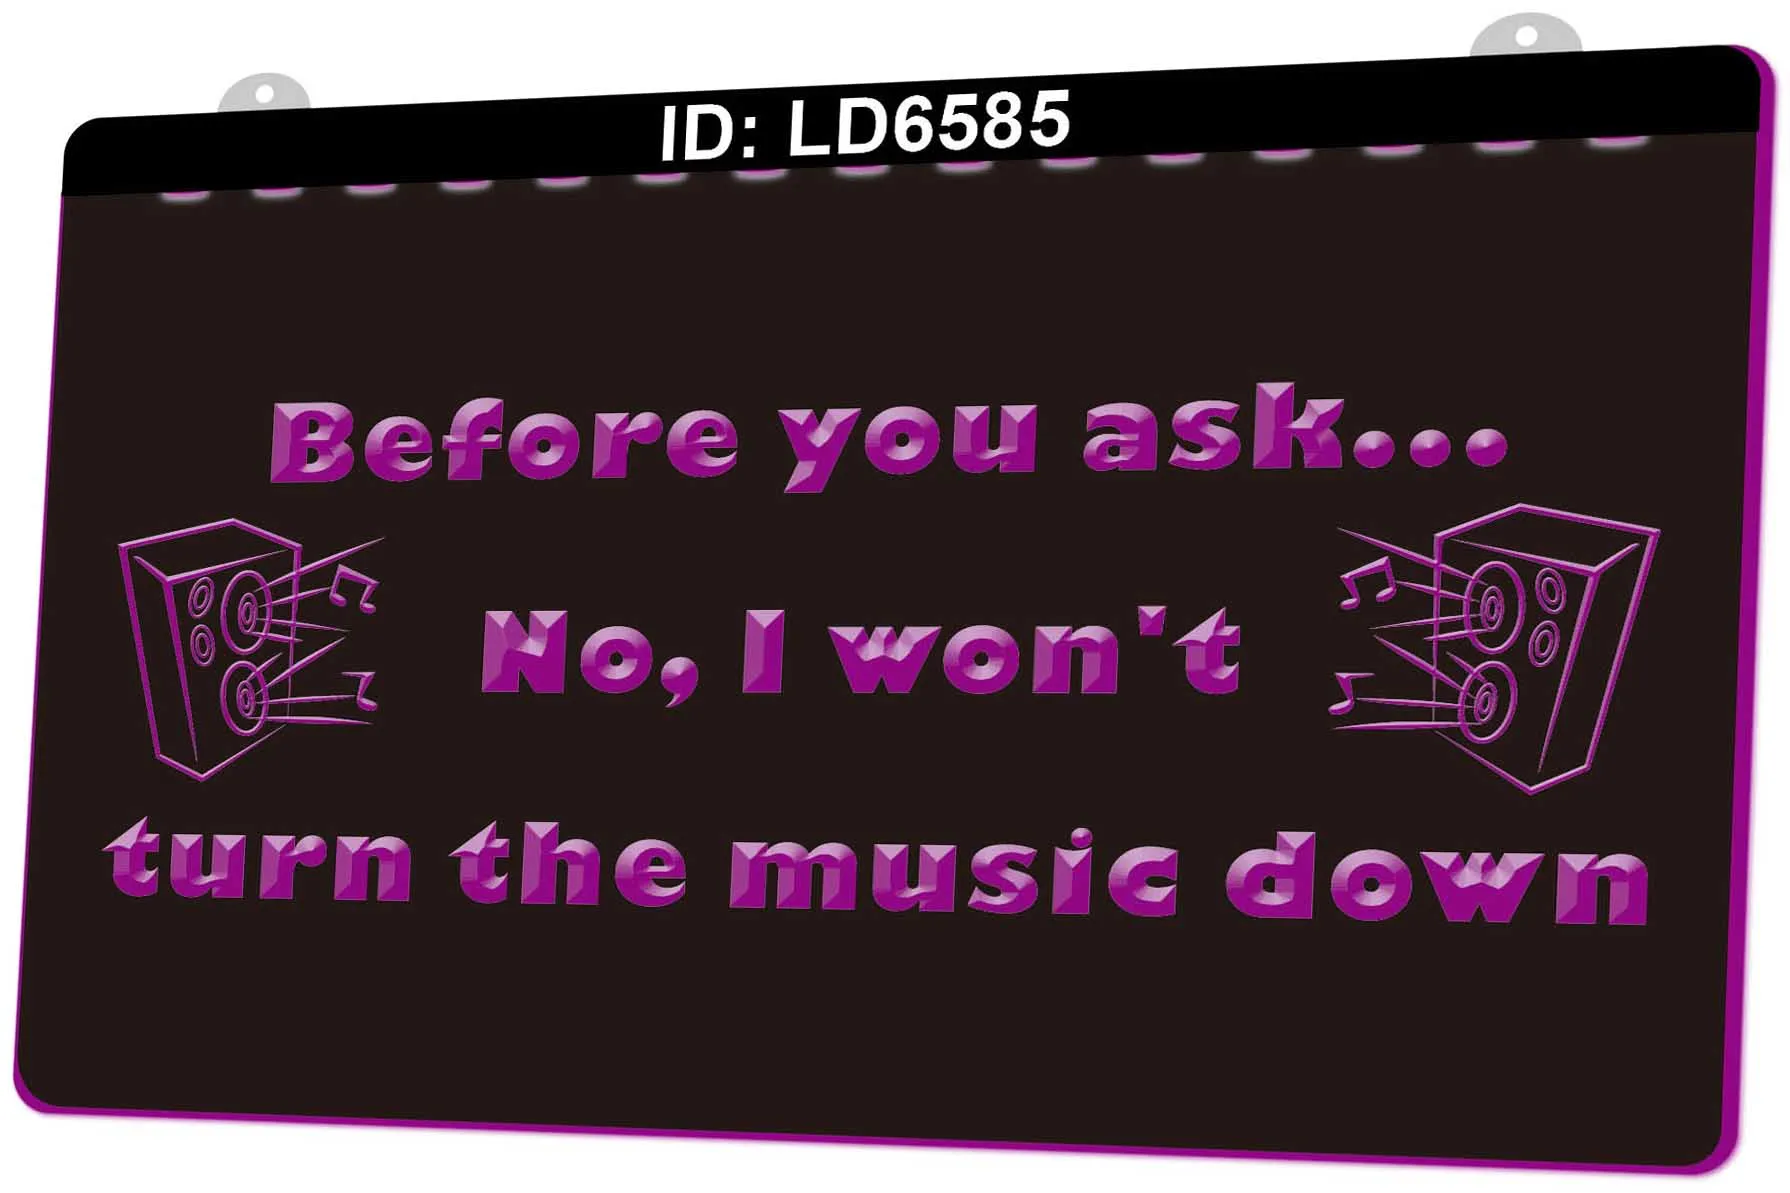 LD6585 Before You Ask No I Wont Turn the Music Down Light Sign 3D Engraving LED Wholesale Retail